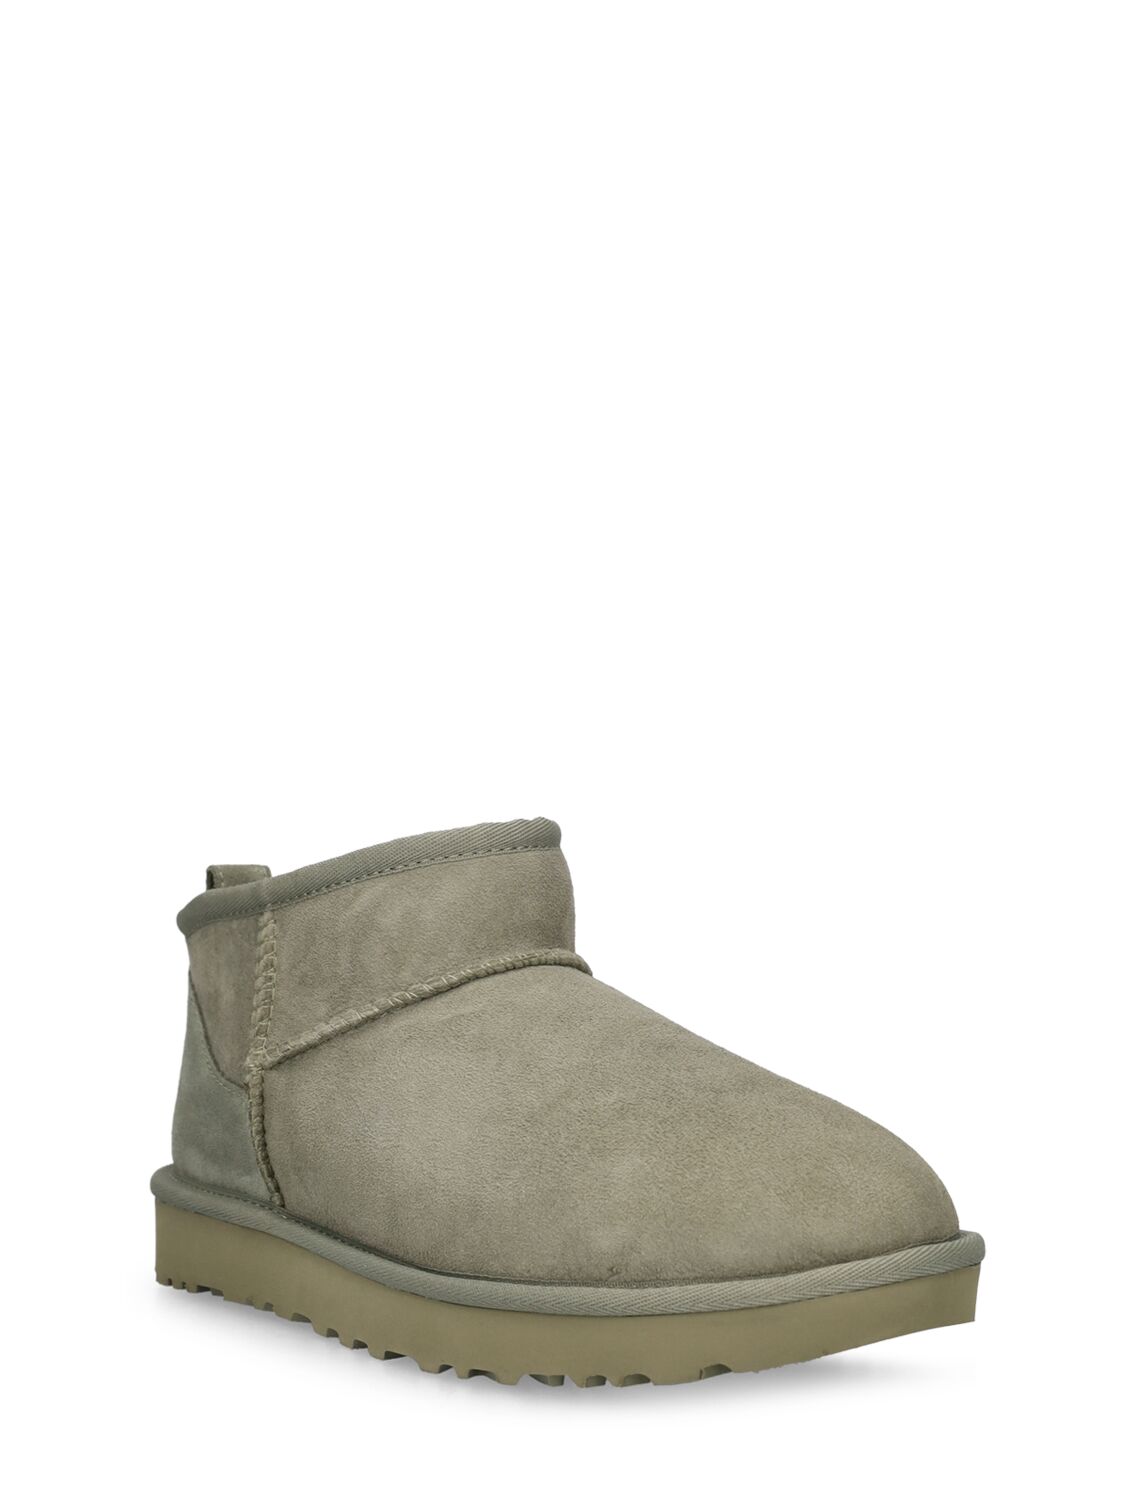 Shop Ugg 10mm Classic Ultra Mini Shearling Boots In Olive Green